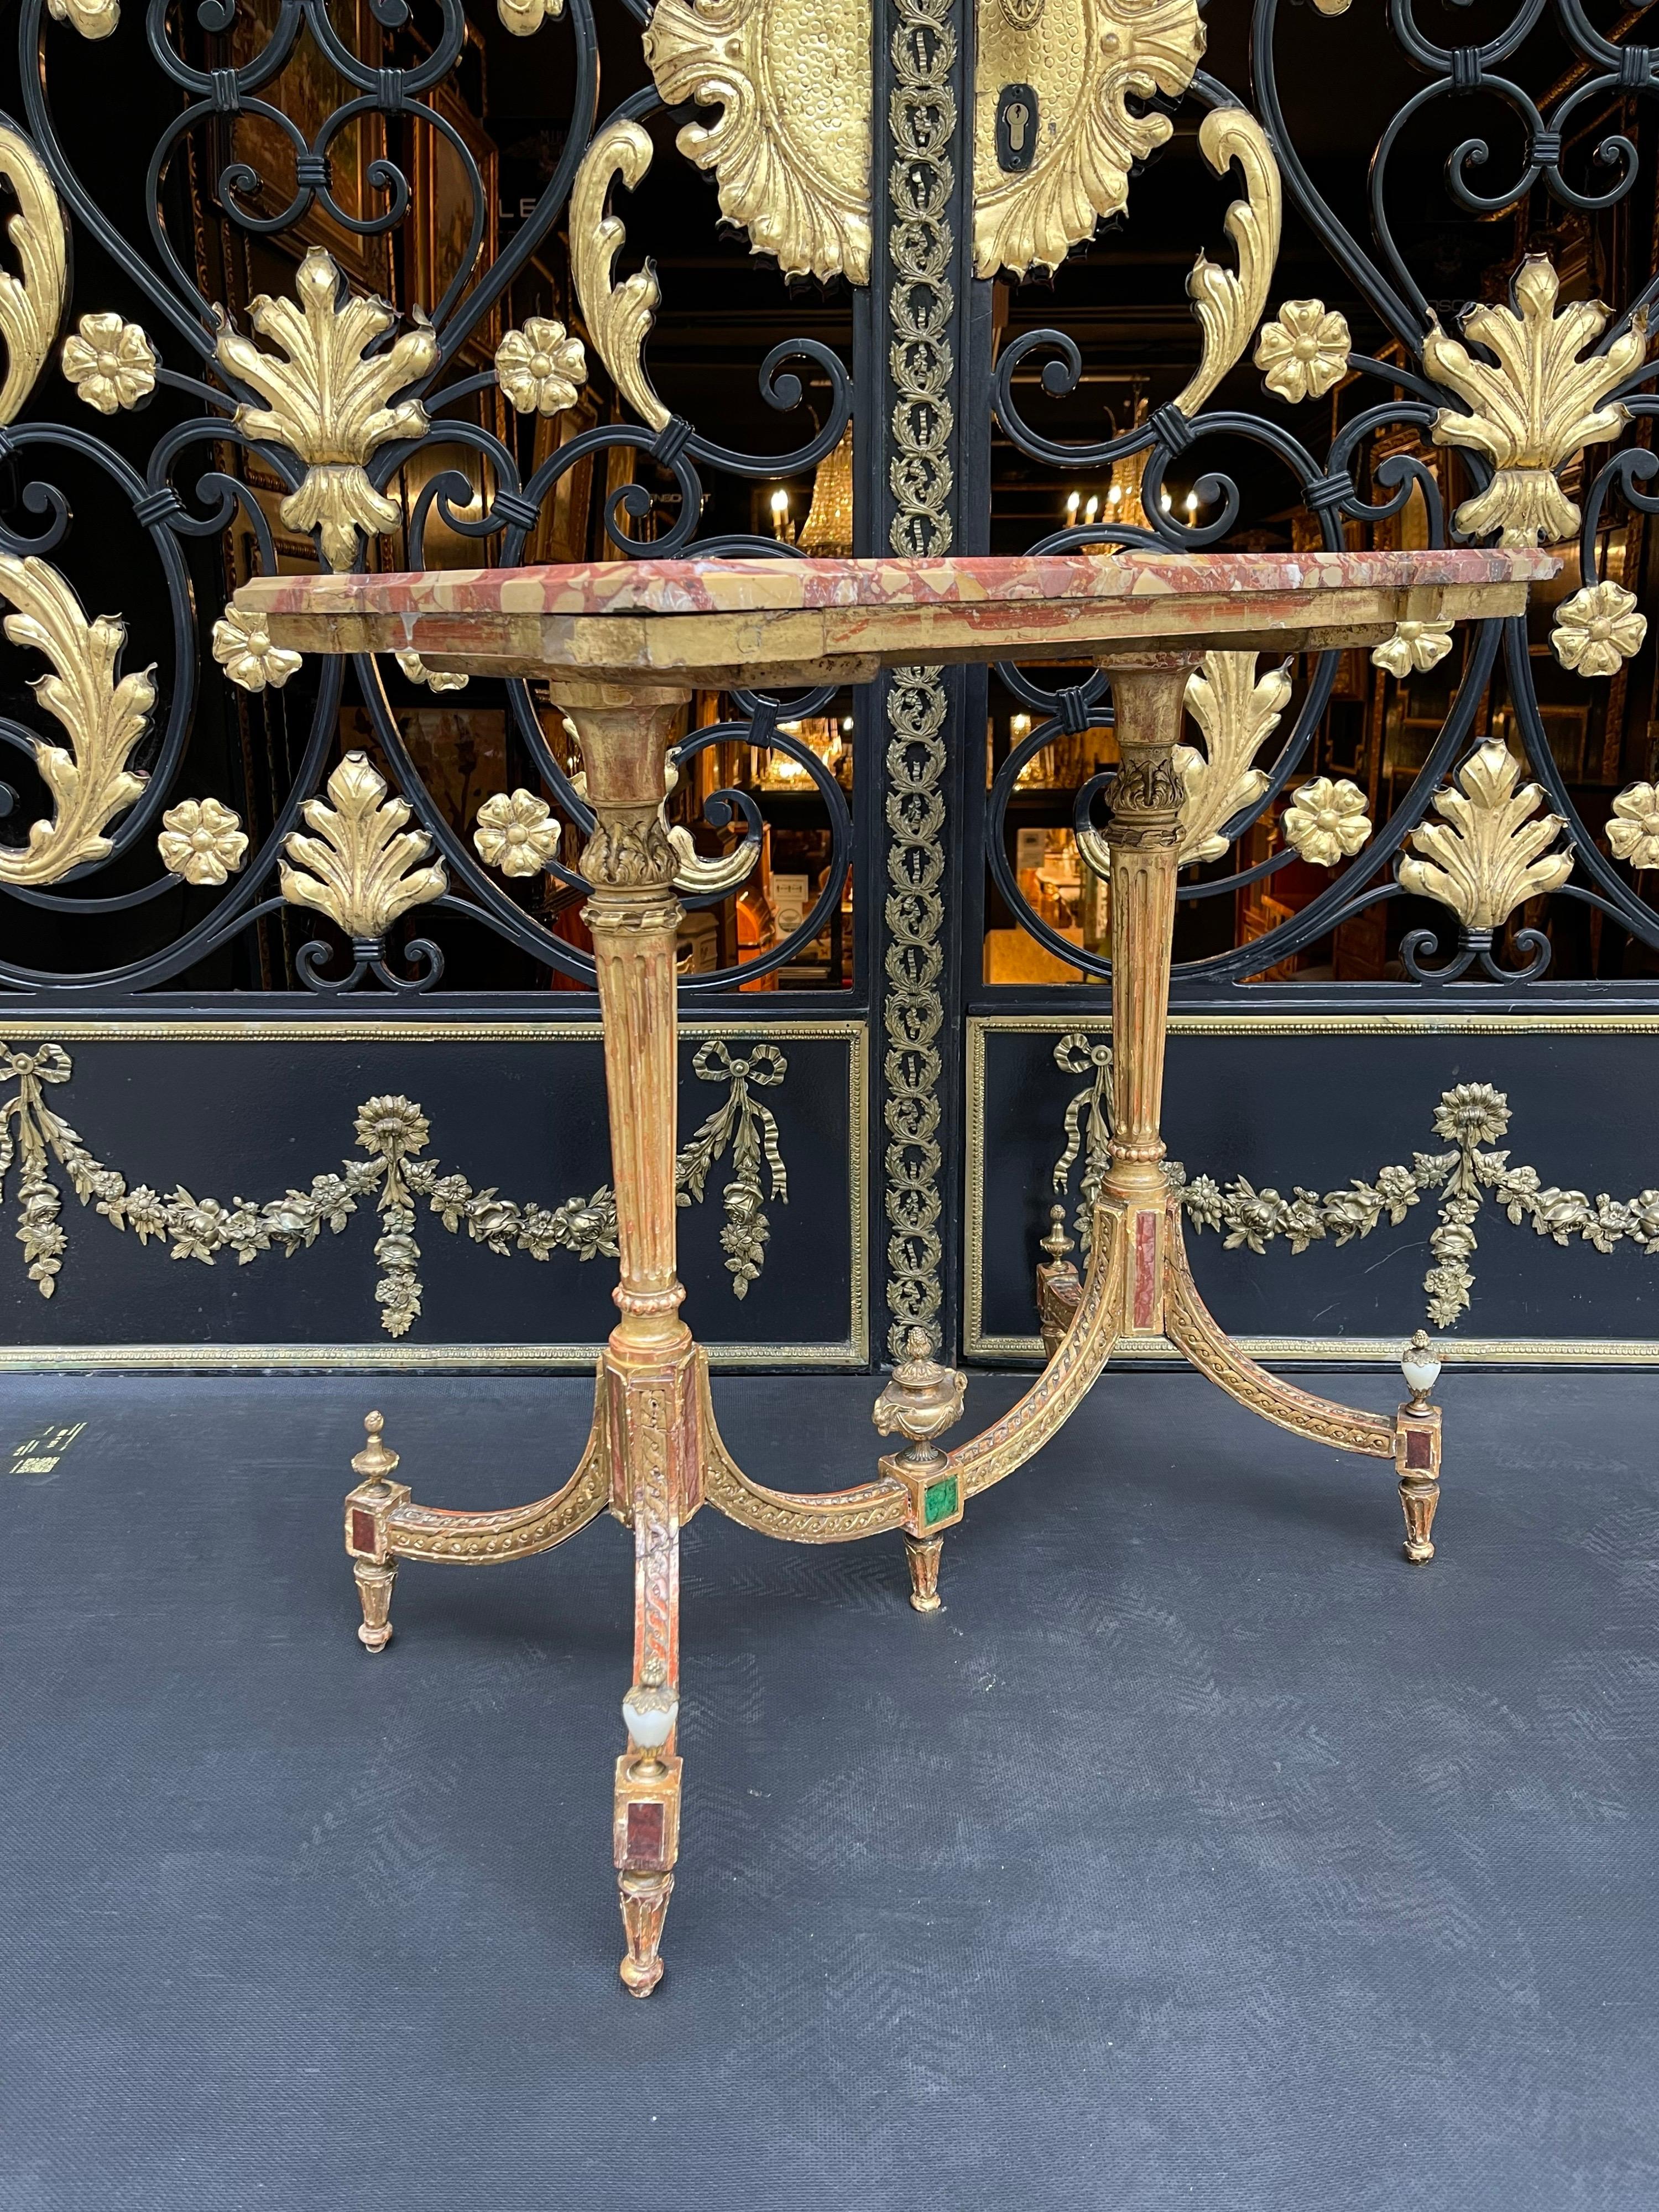 Museum Louis XVI table / side table, Russia around 1790, gold-plated

Unique museum side table around 1790. Probably Russia / Scandinavia. Solid oak gilded and very finely carved.

Extremely detailed ornate. Four curved legs each crowned with an